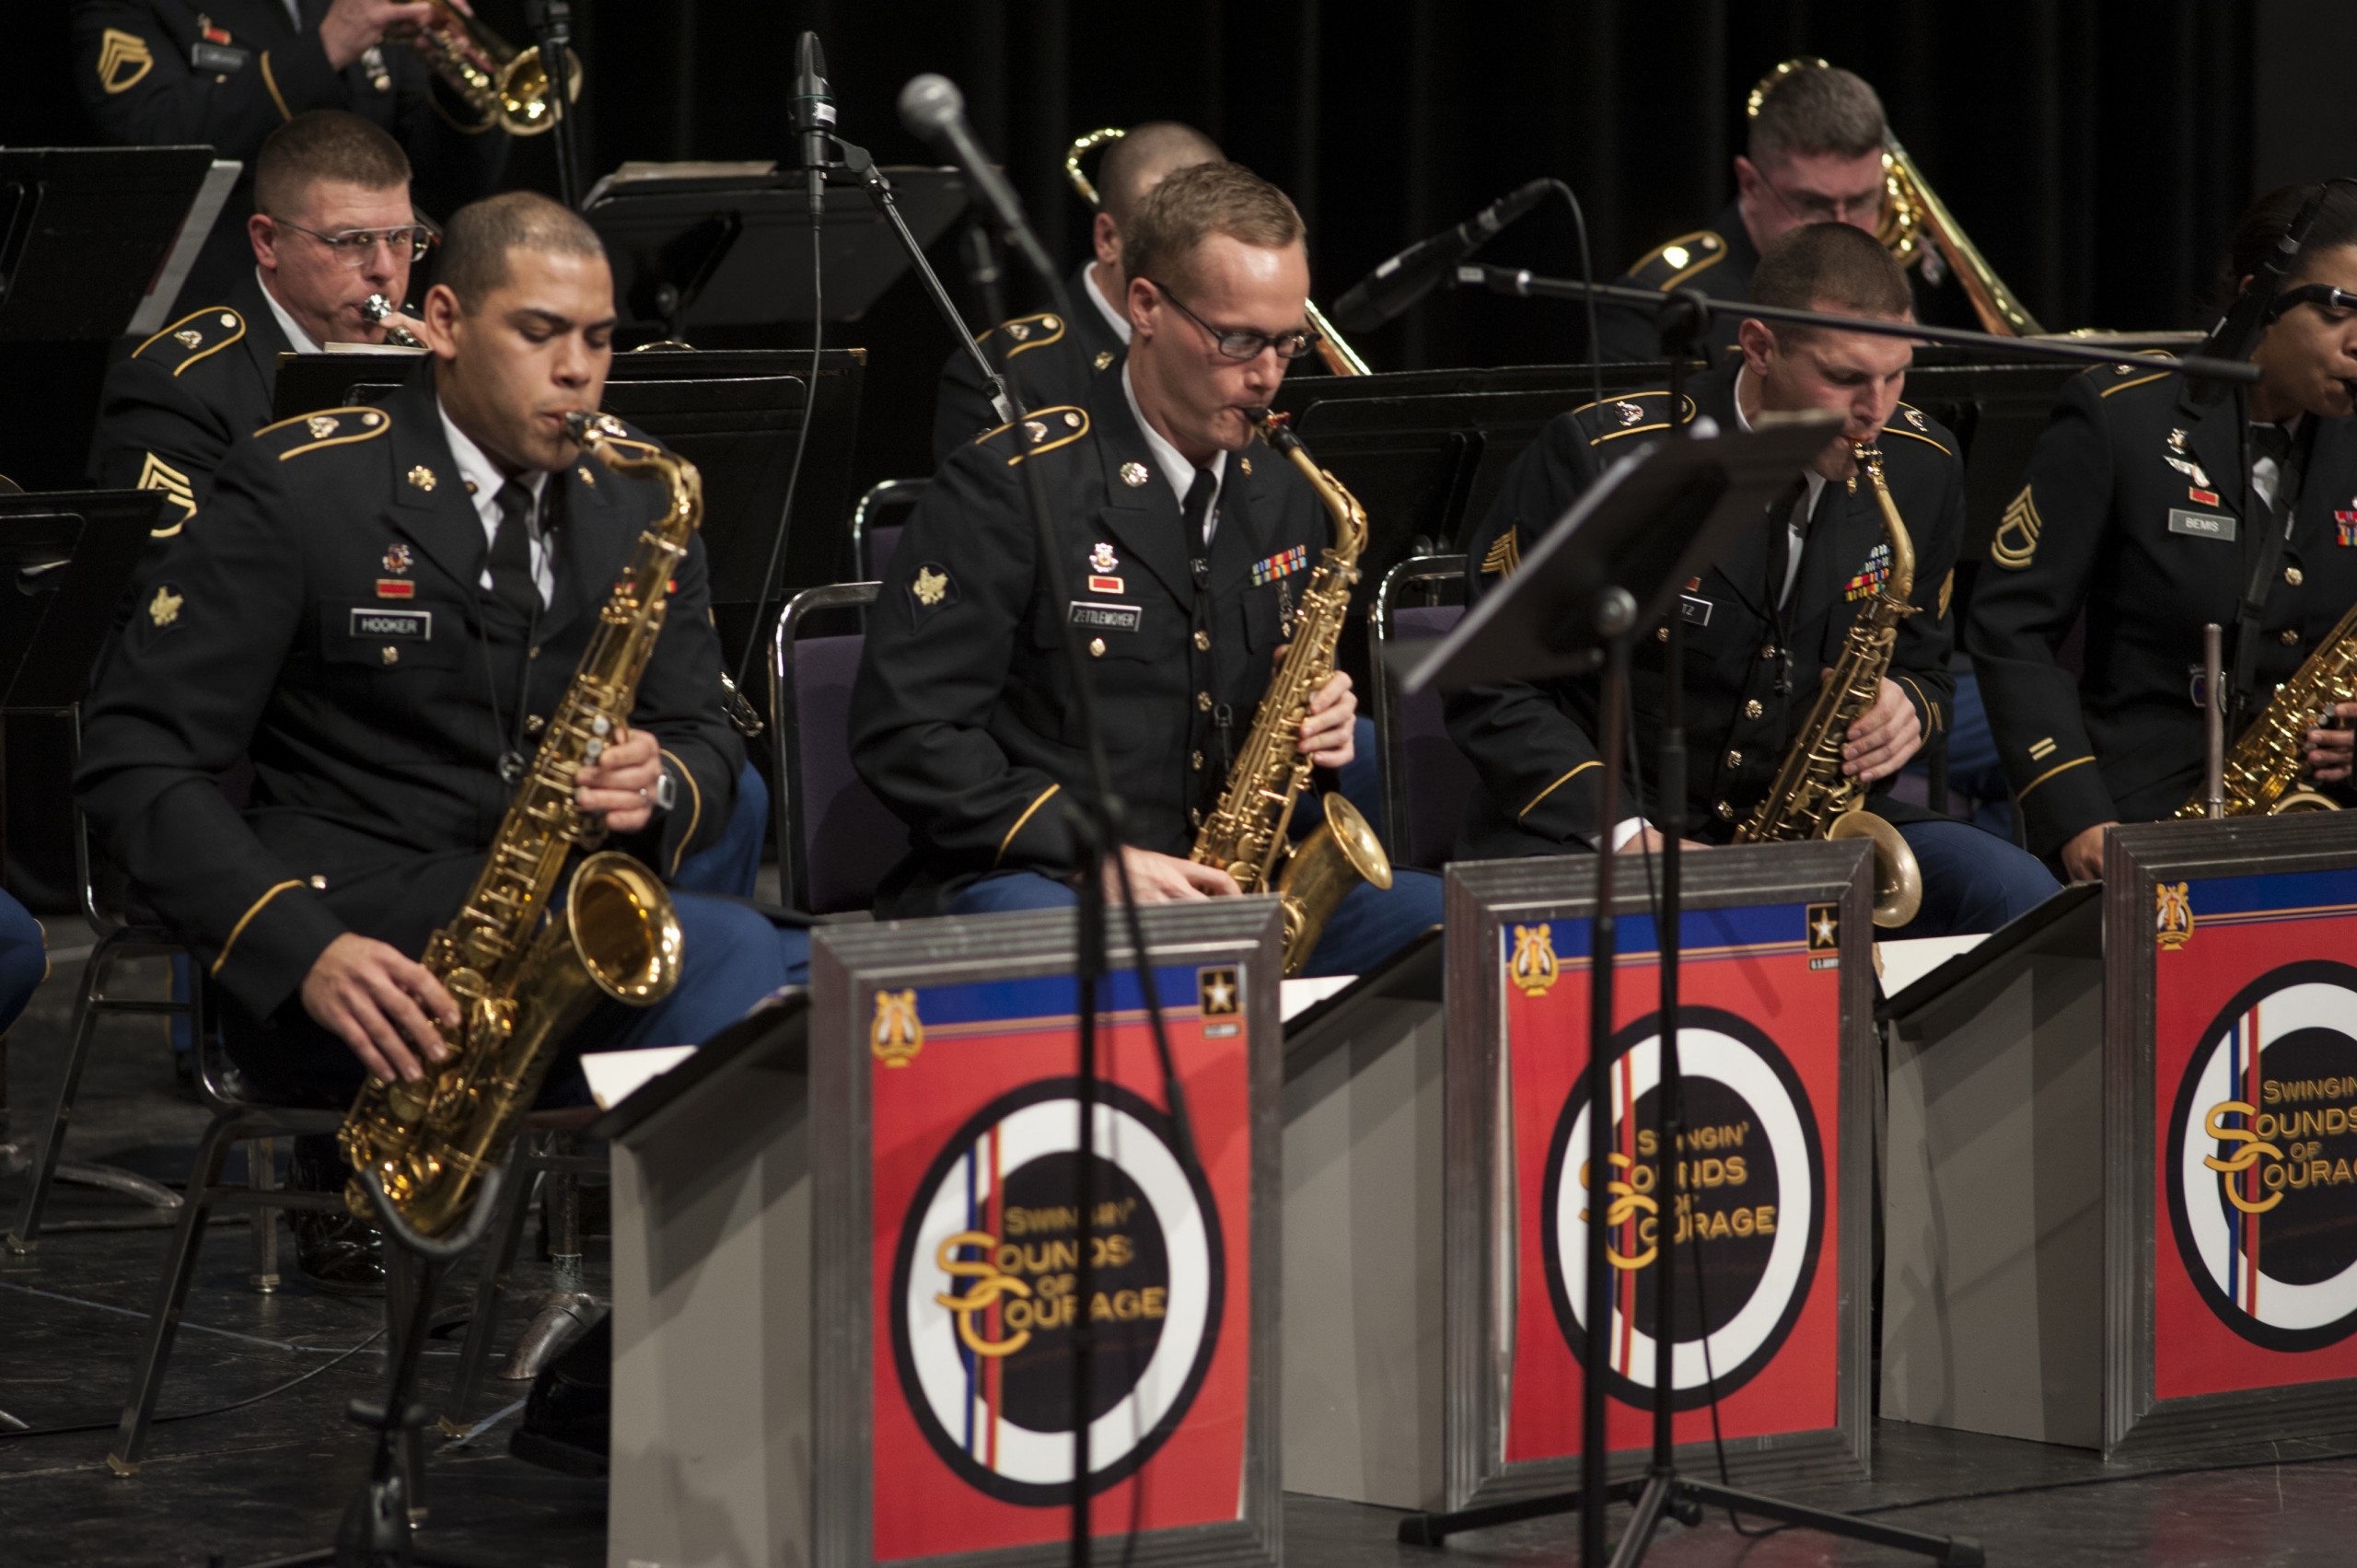 JBLM’s Swingin’ Sounds of Courage played a Veterans Day performance at PLU in November 2013. (Photo: John Froschauer/PLU)